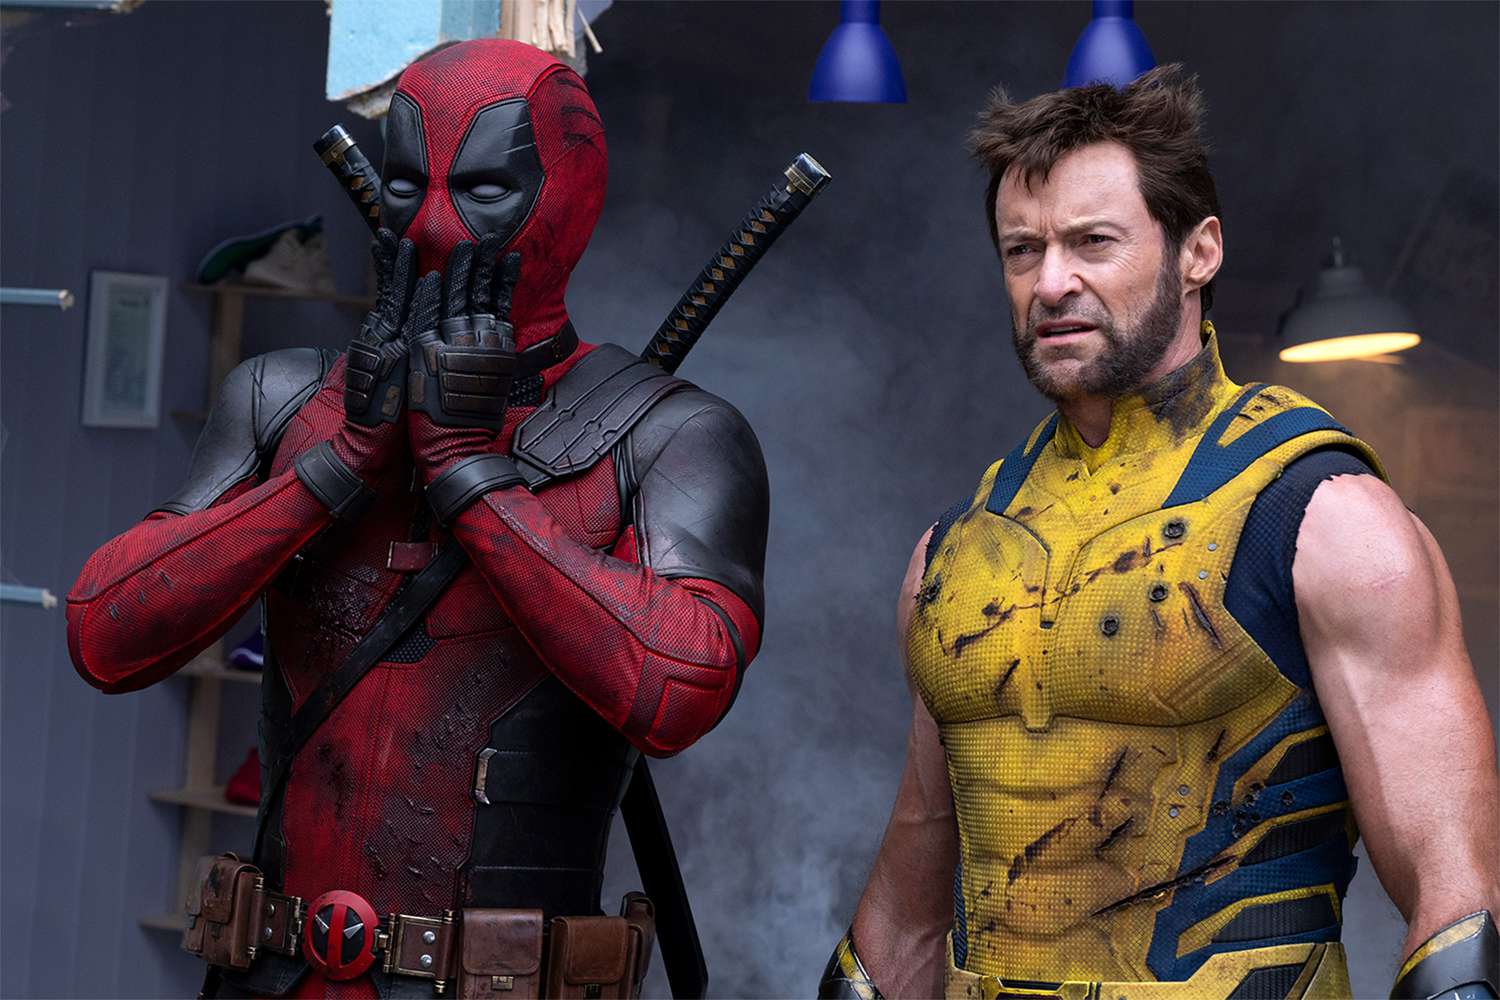 'Deadpool & Wolverine' review: Relentlessly irritating, with cheap jokes instead of stake